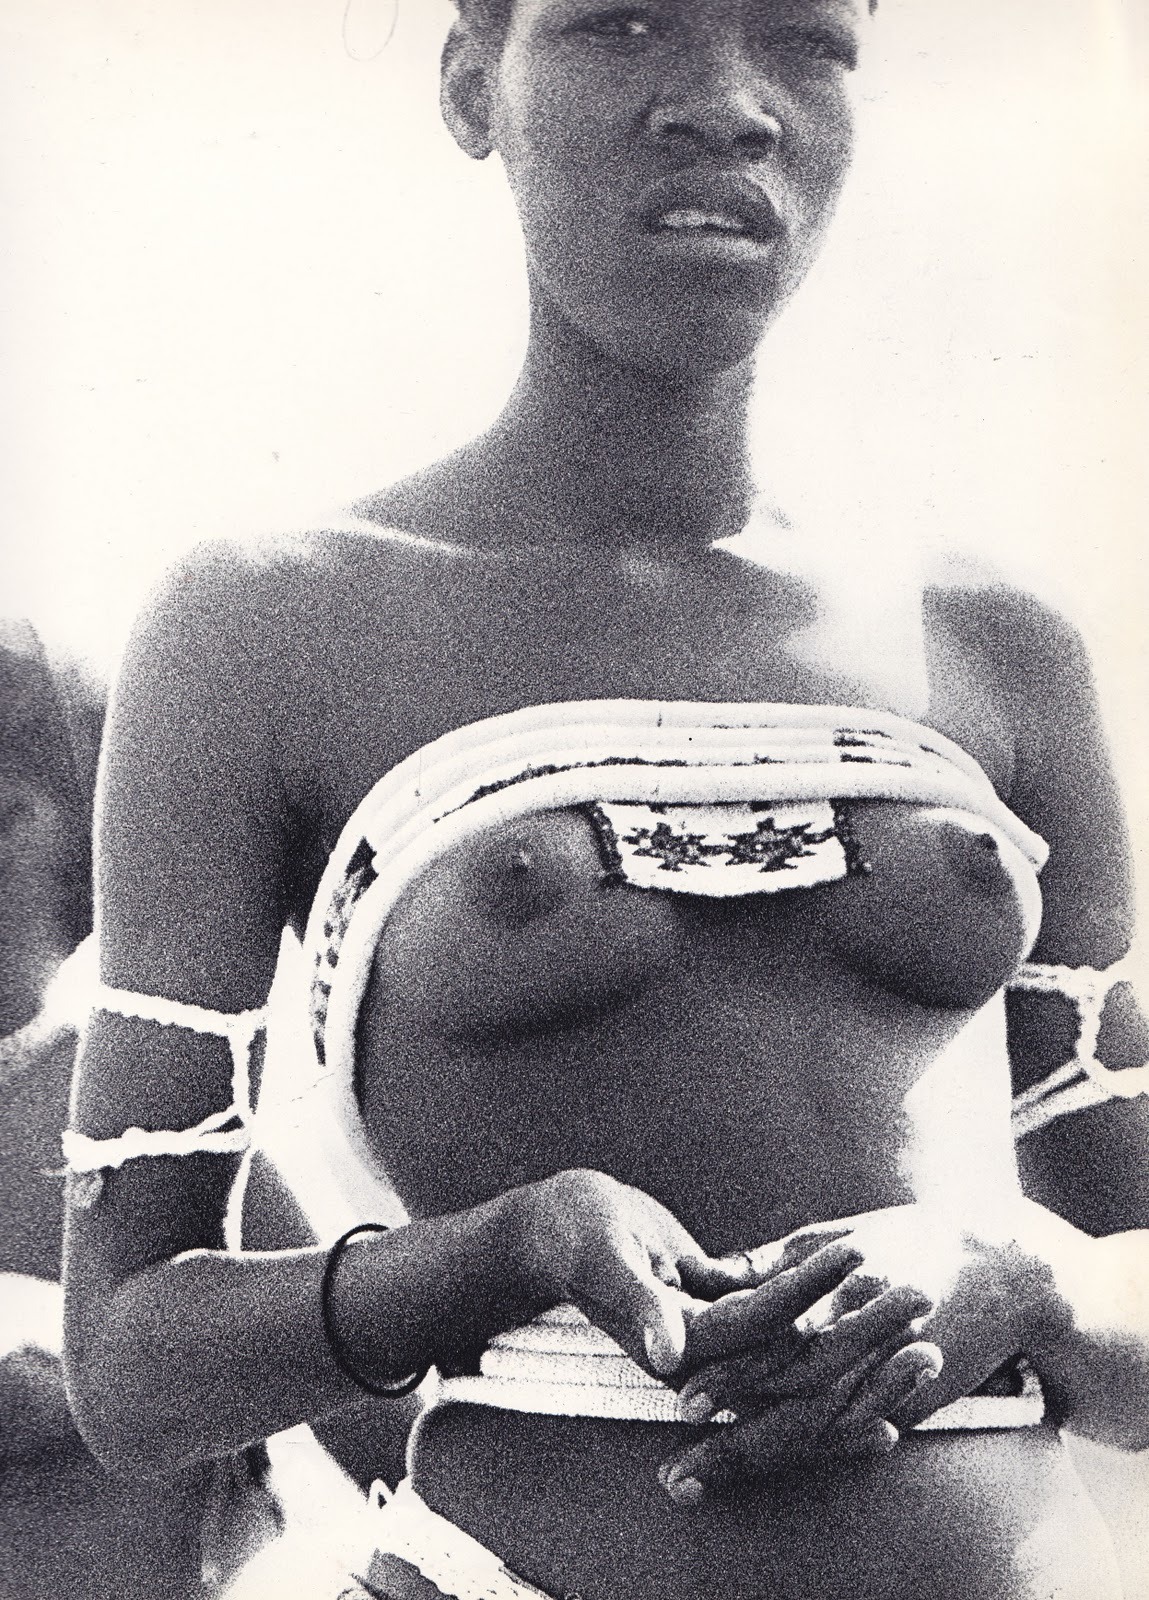 From African Image, by Sam Haskins. See more samples on Naked Books. And see more